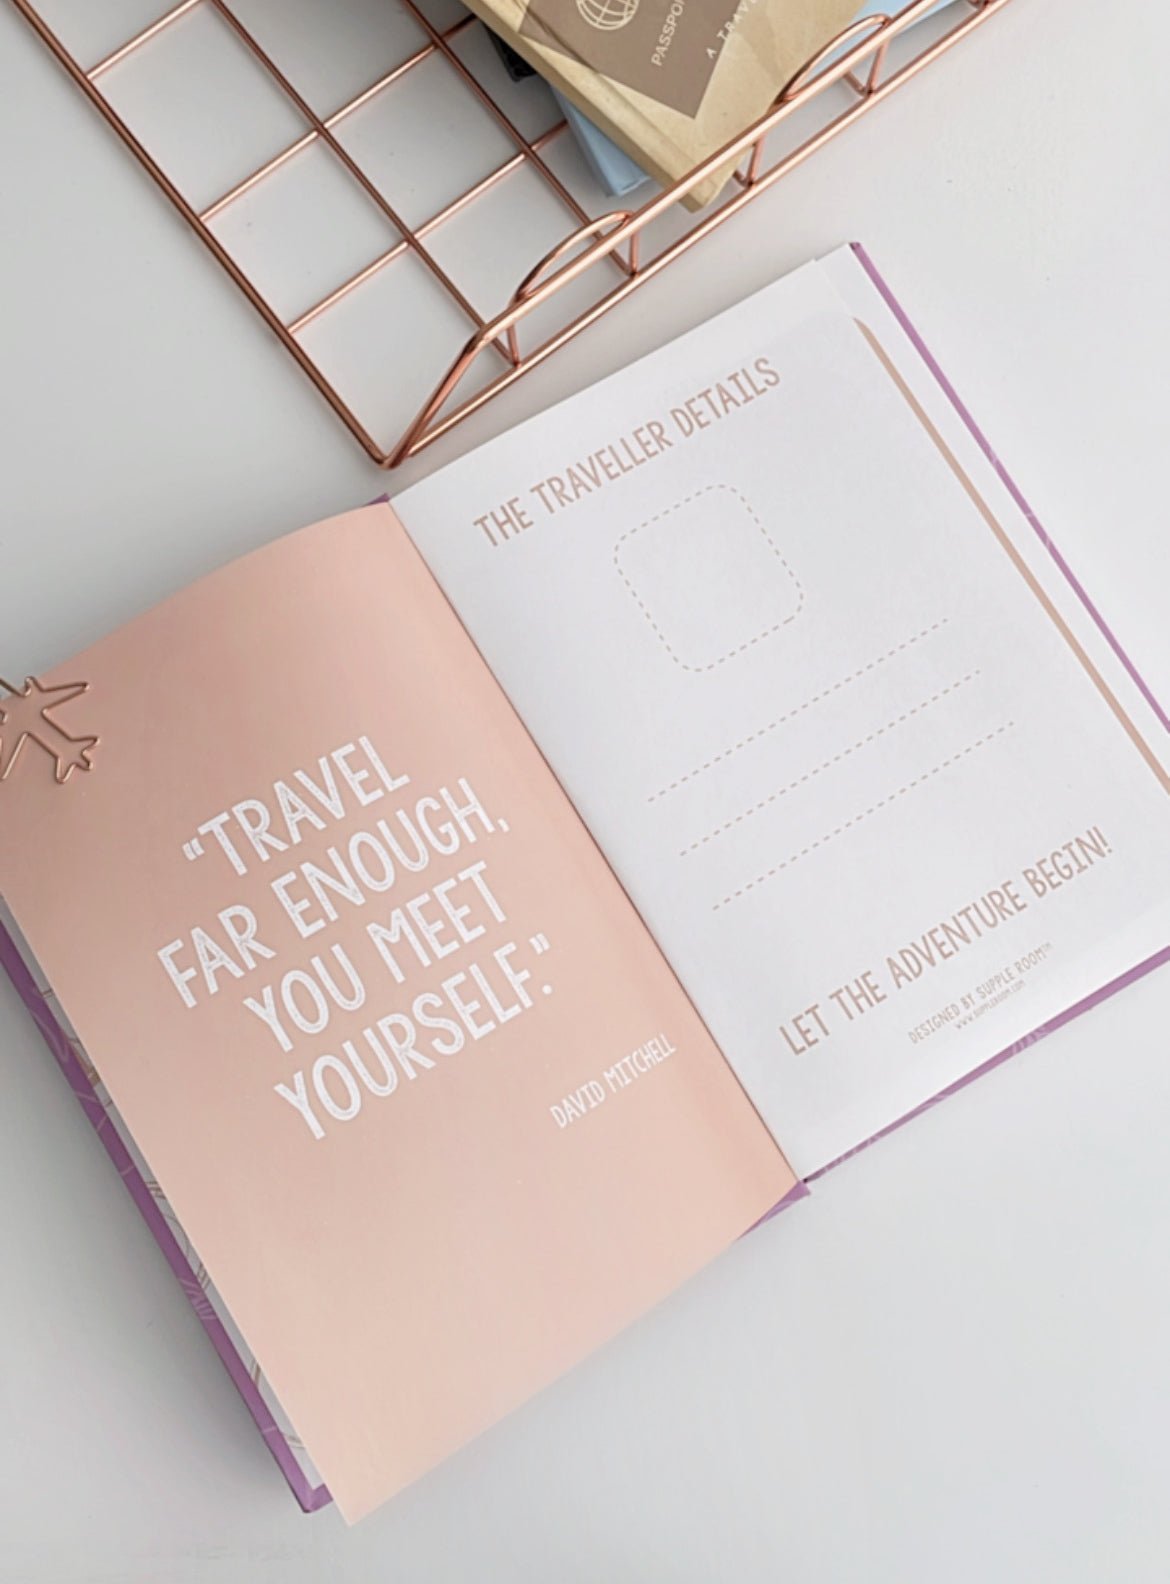 "Live Love Travel" Travel Planner Journal | A5 Size Hardcover - Supple Room